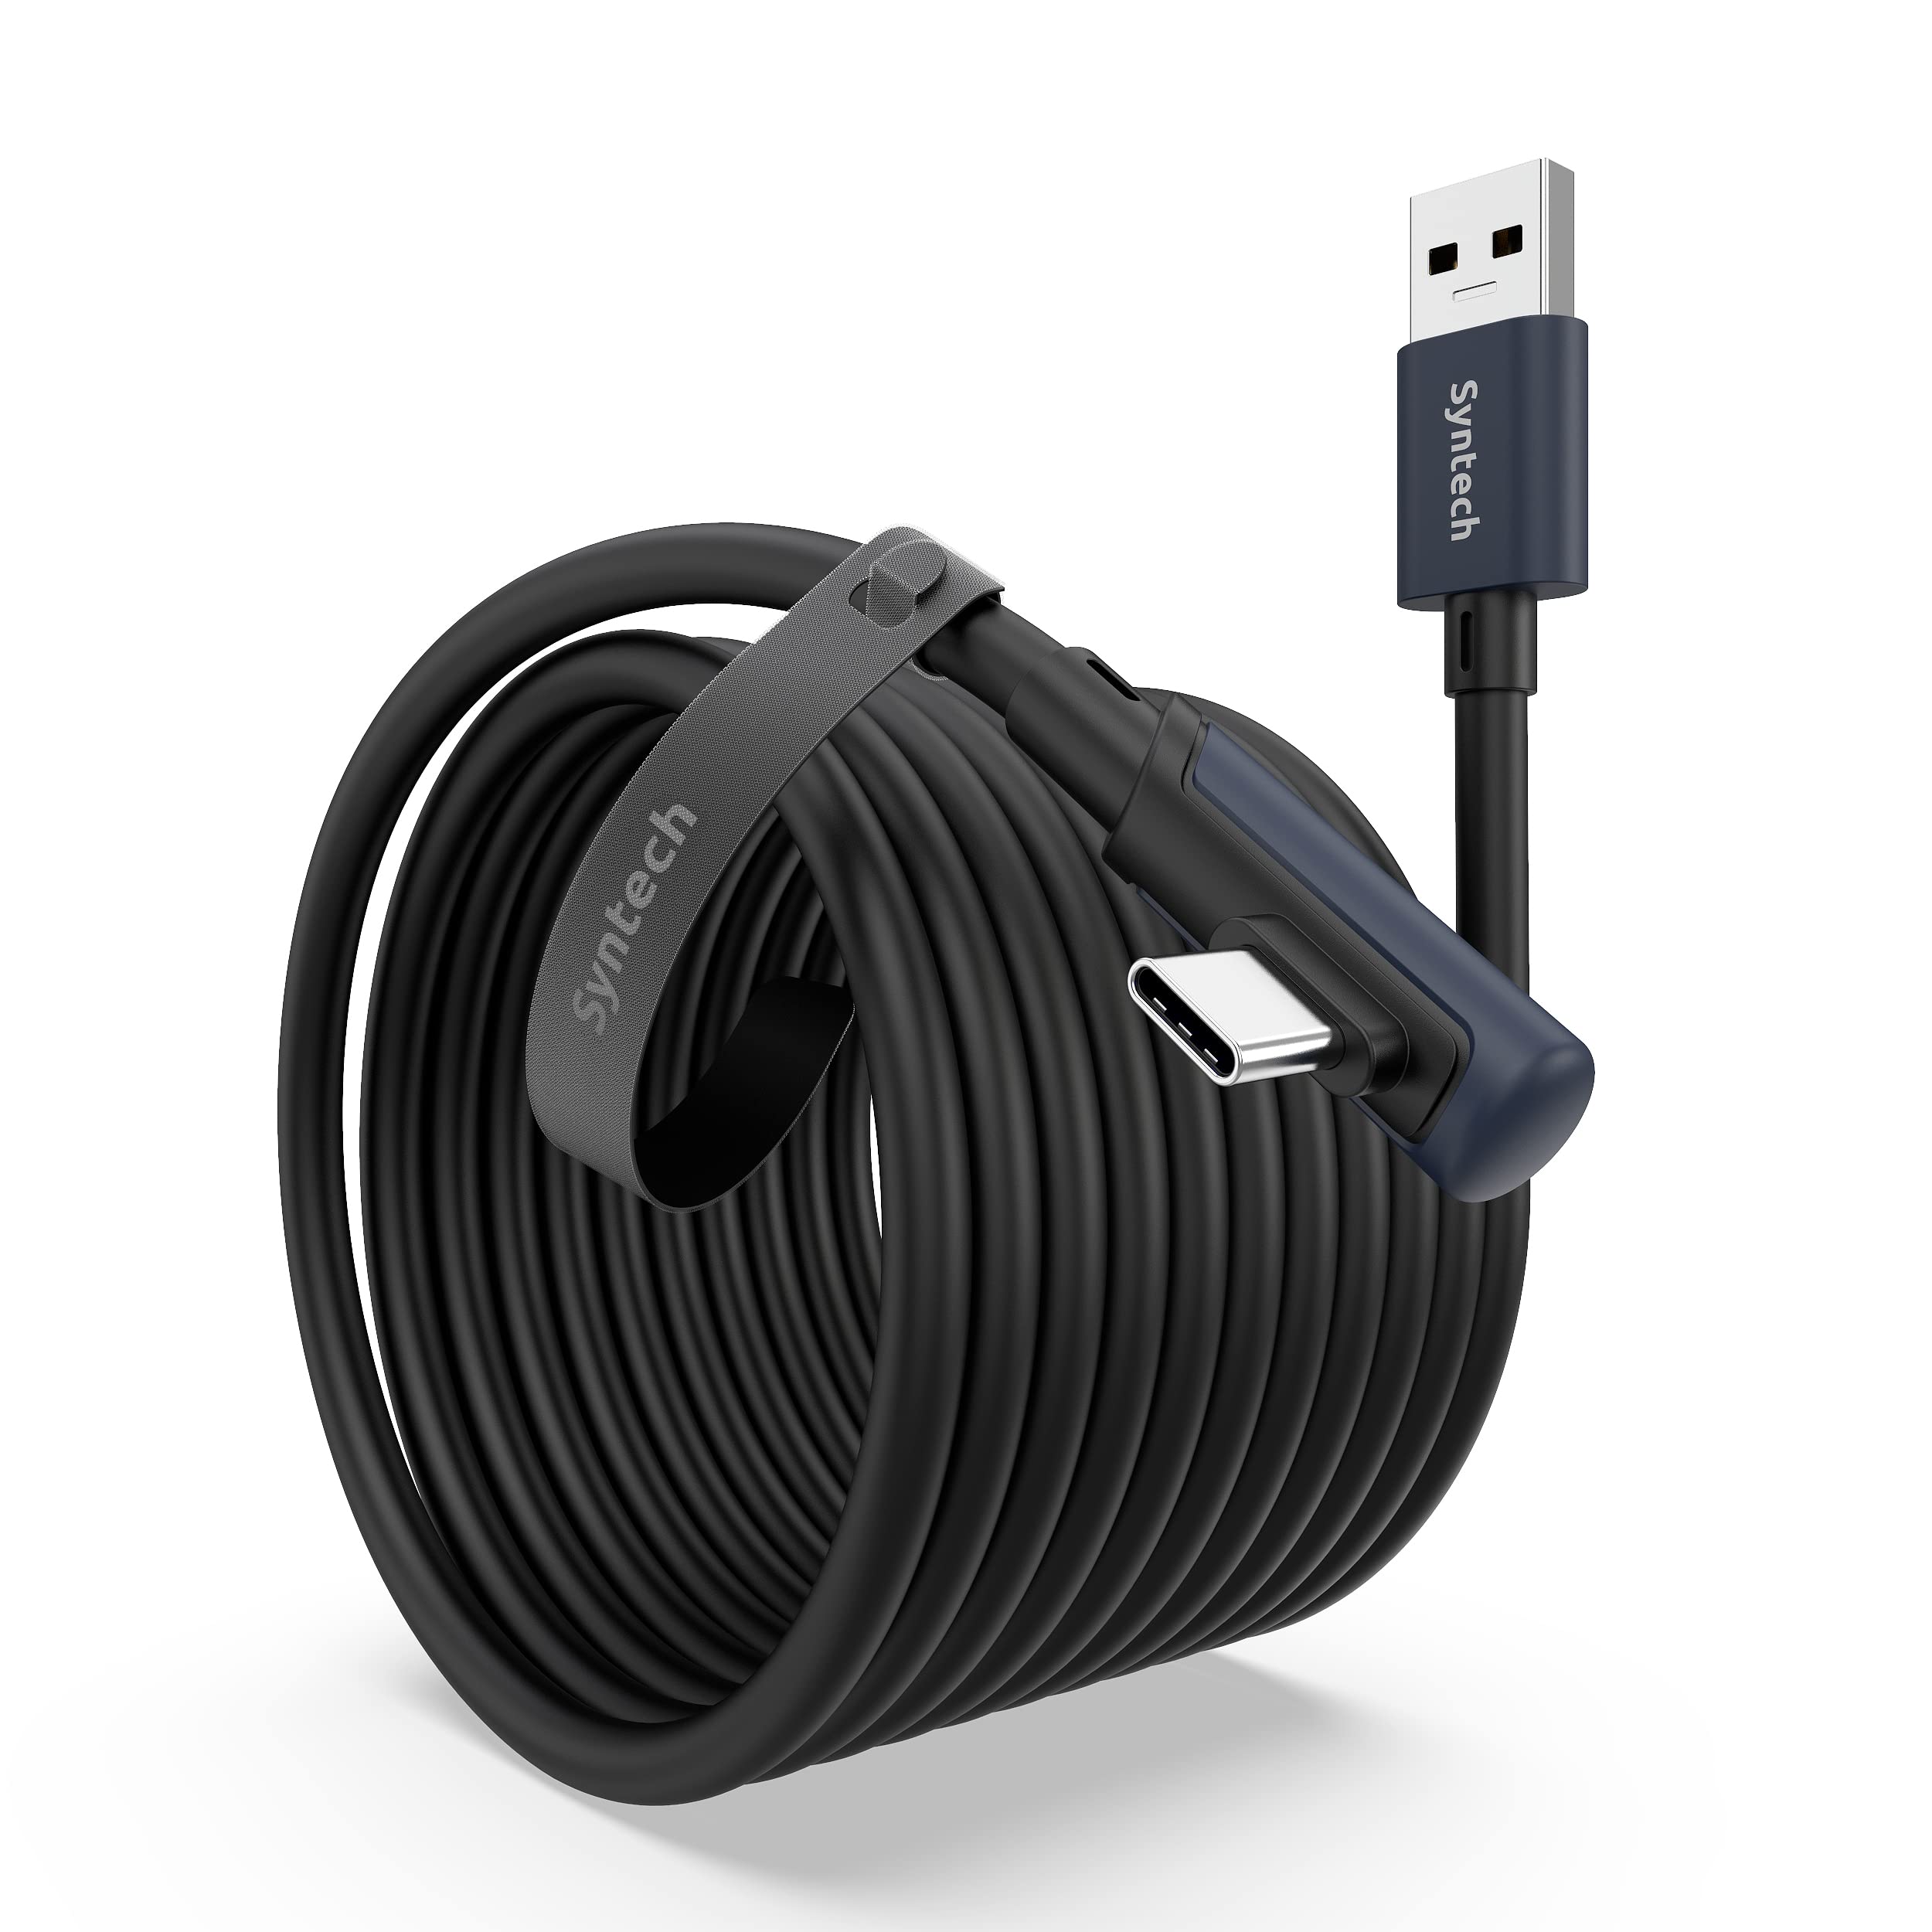  Syntech Link Cable 16FT Compatible with Meta/Oculus Quest 2  Accessories VR Headset, Separate USB C Charging Port for Sufficient Power,  USB 3.0 to Type C Cord LED Light for Steam VR/Gaming